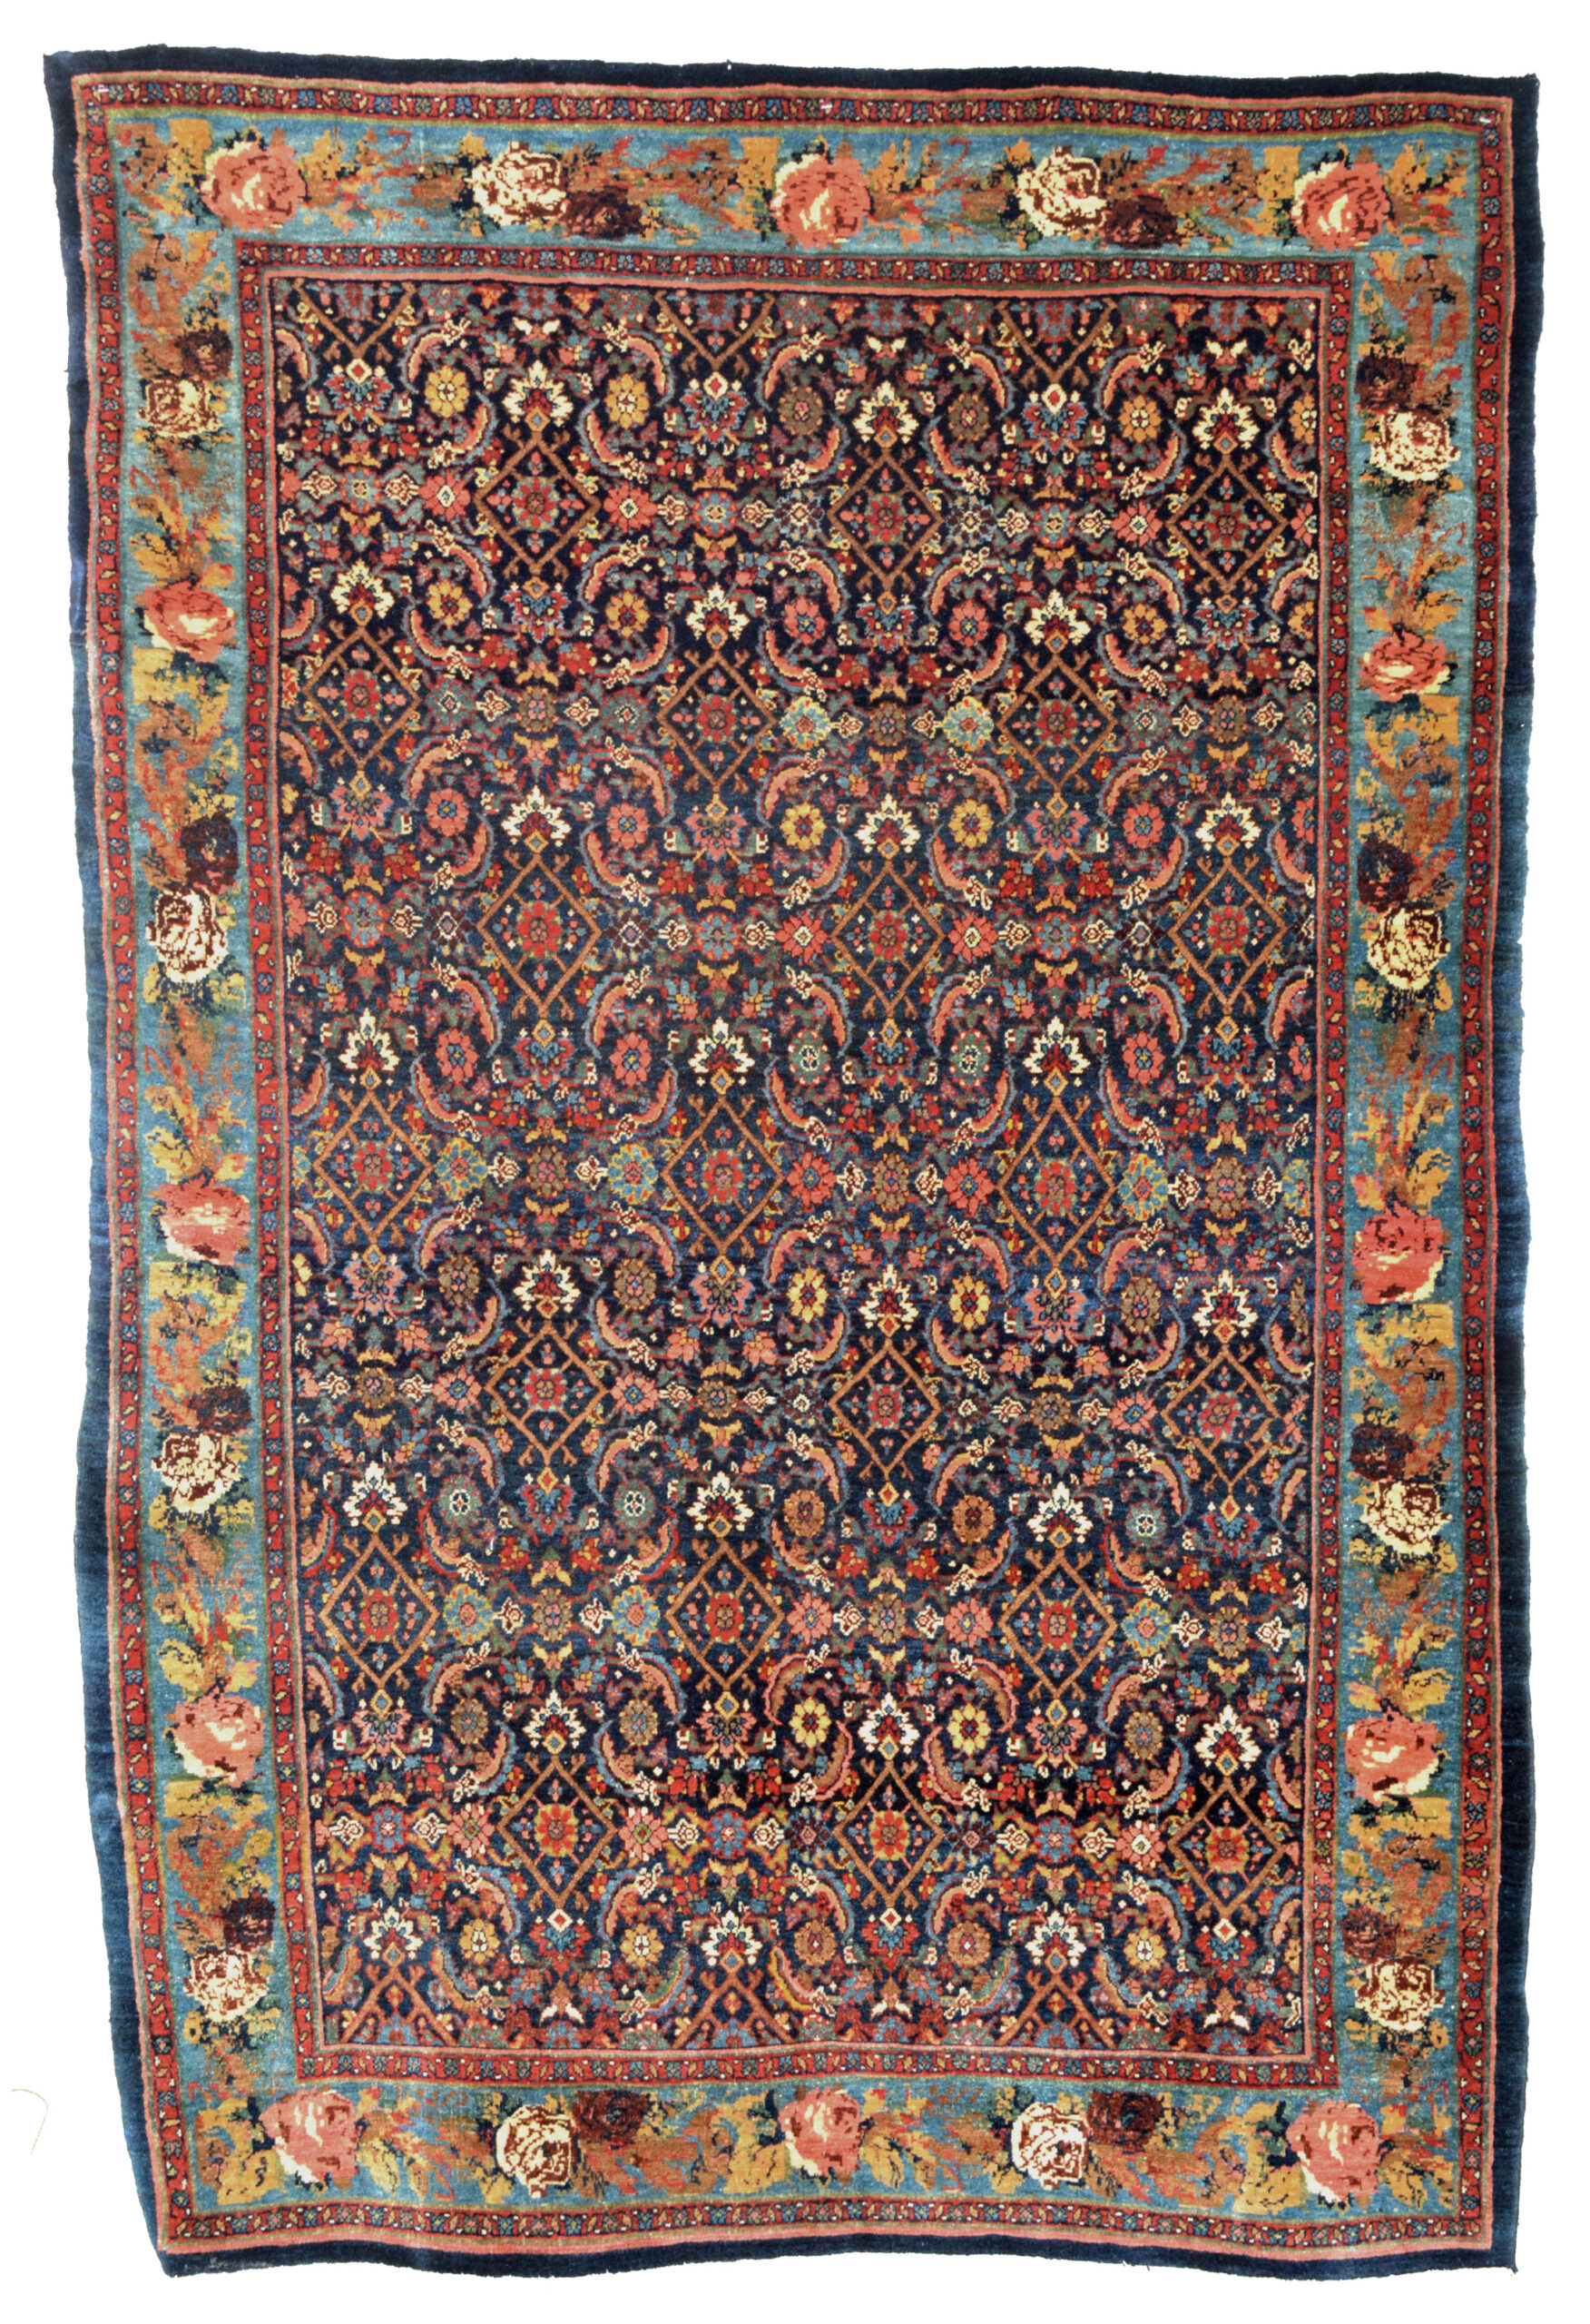 A finely woven antique Bidjar rug with the classical Herati design on a navy blue field, northwest Persian, circa 1900 -Doglas Stock Gallery, antique Persian rugs